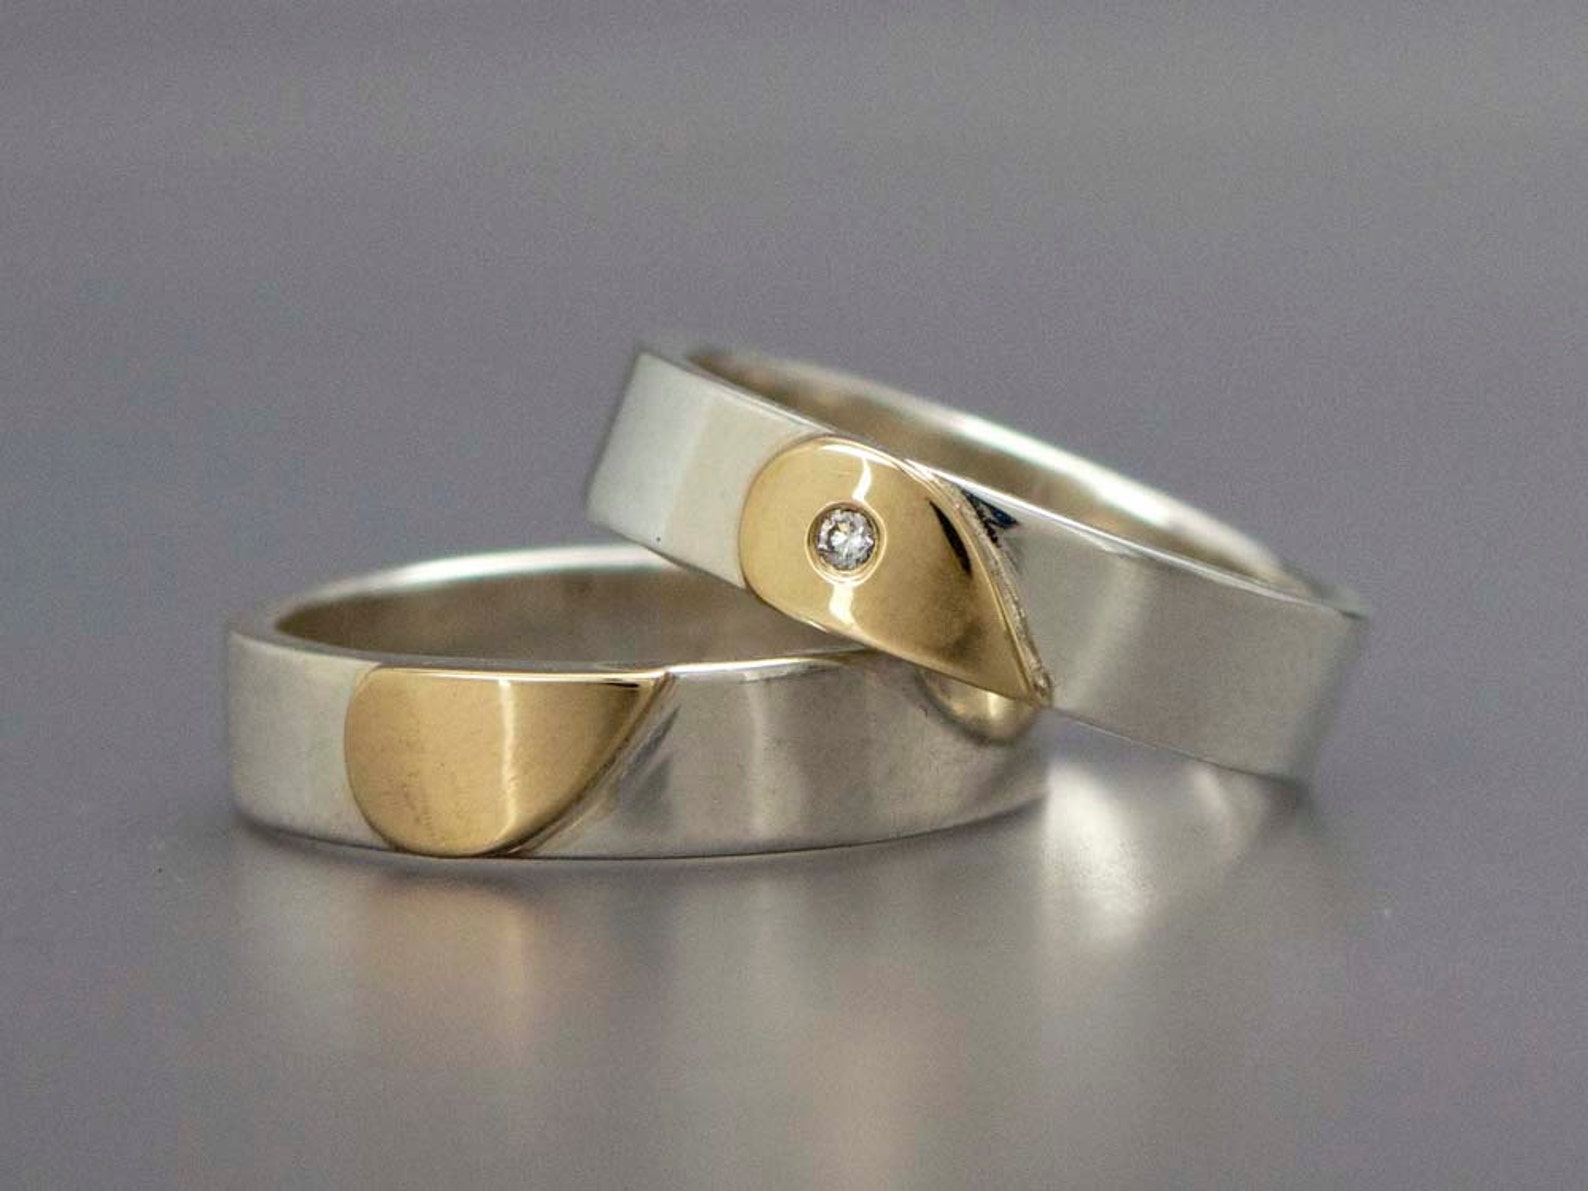 Diamond Heart Wedding Band Set in 14k Gold and Sterling Silver - Etsy